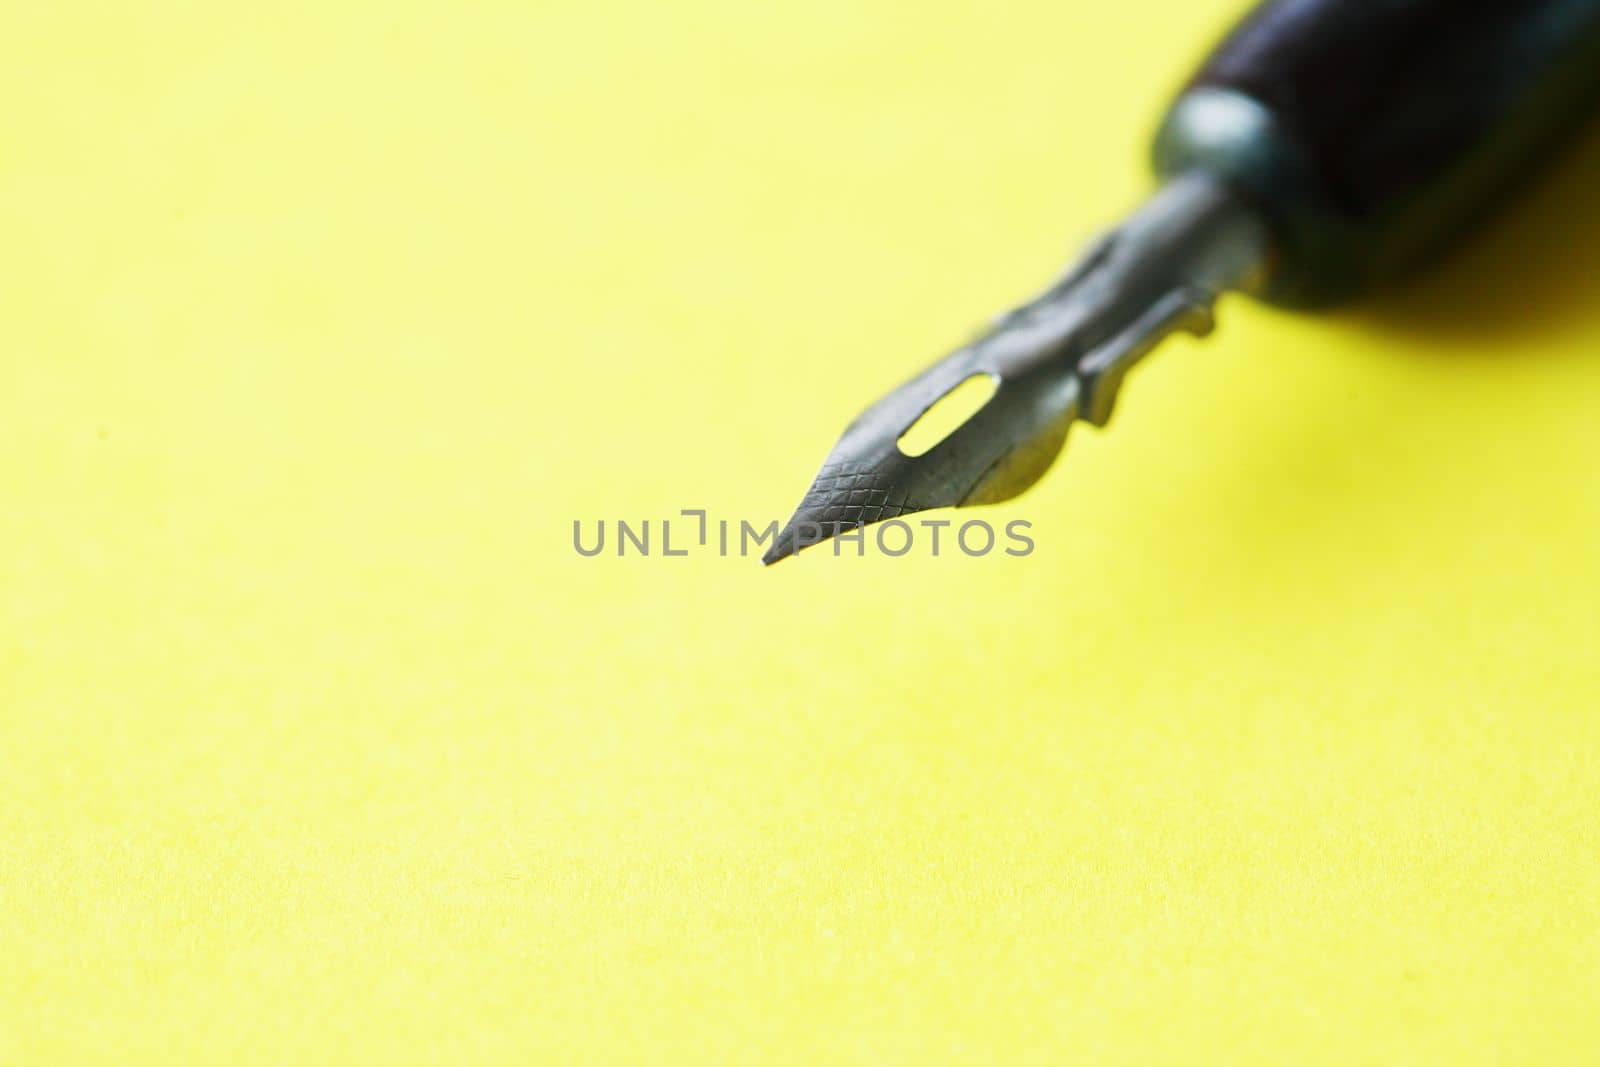 Closeup of nice vintage ink pen on empty yellow paper